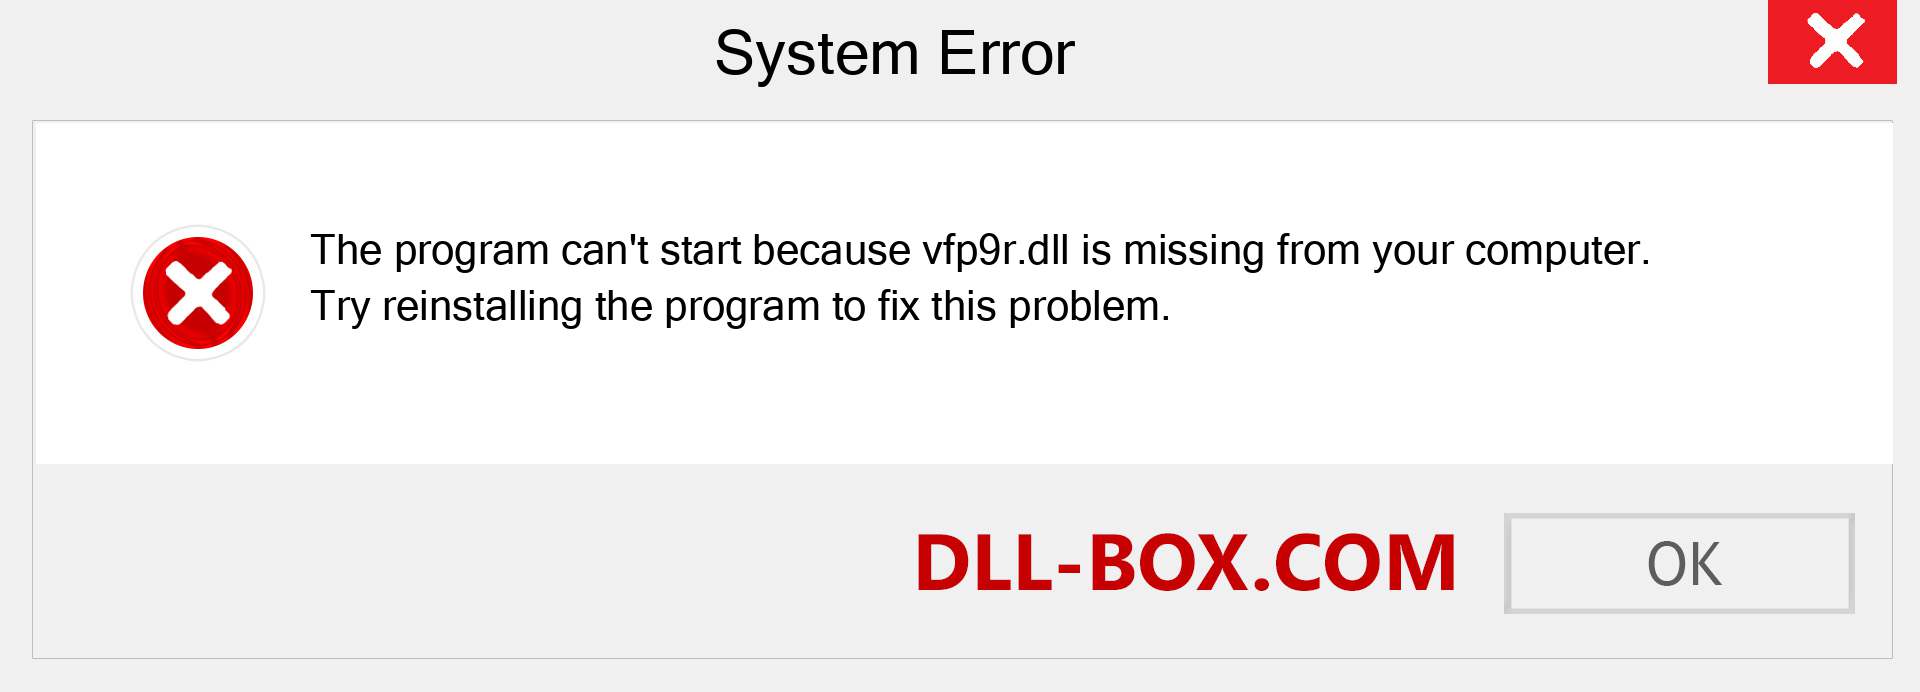  vfp9r.dll file is missing?. Download for Windows 7, 8, 10 - Fix  vfp9r dll Missing Error on Windows, photos, images